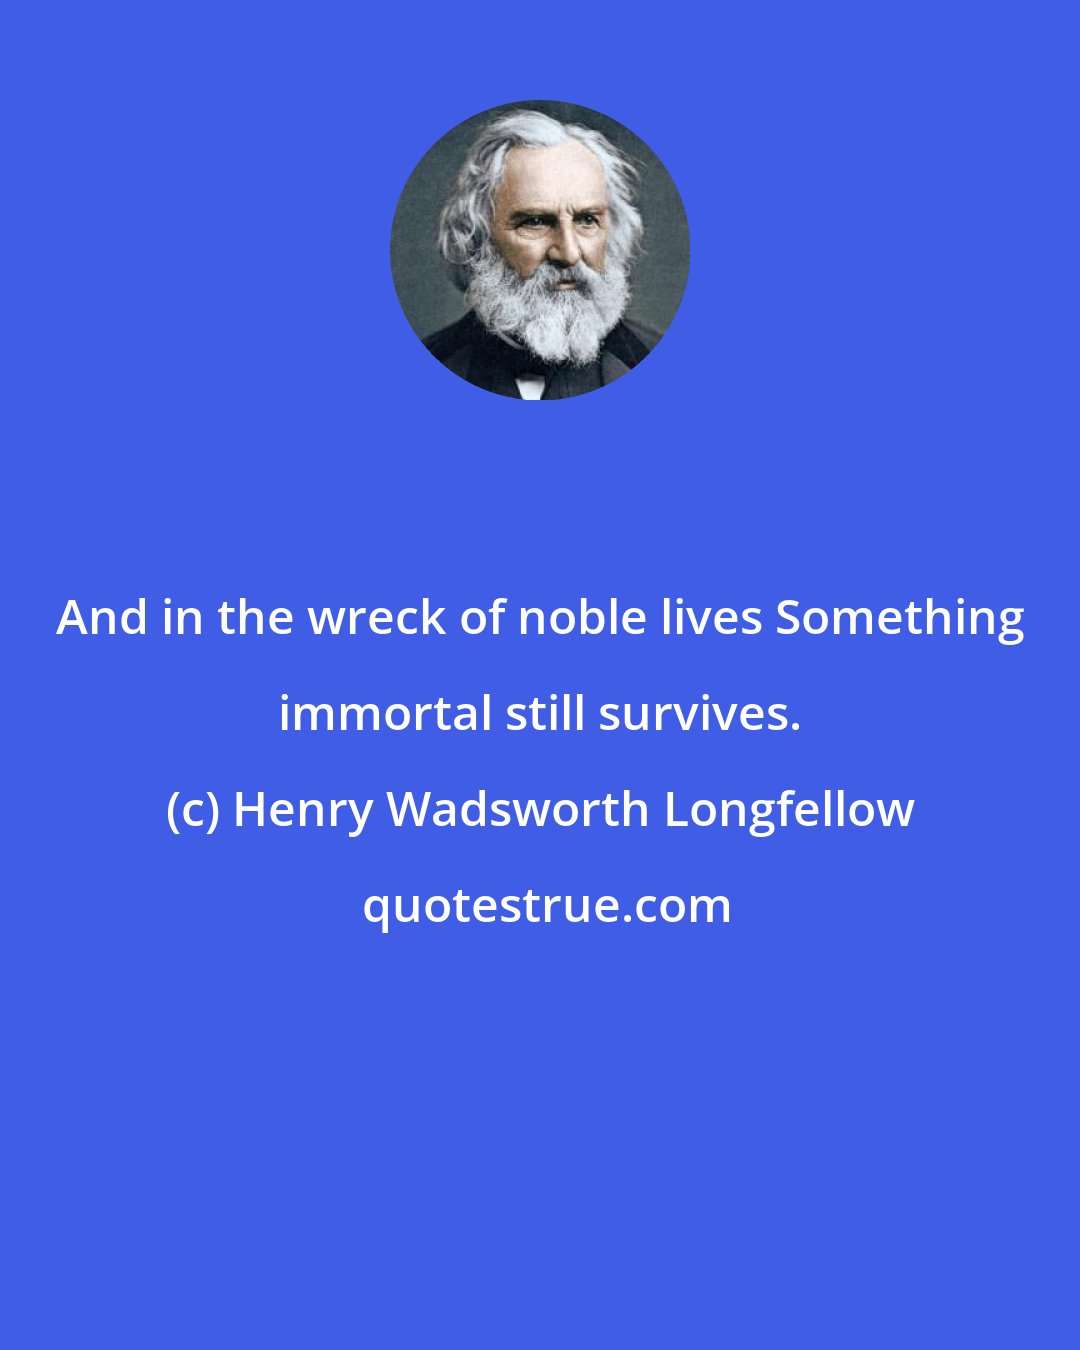 Henry Wadsworth Longfellow: And in the wreck of noble lives Something immortal still survives.